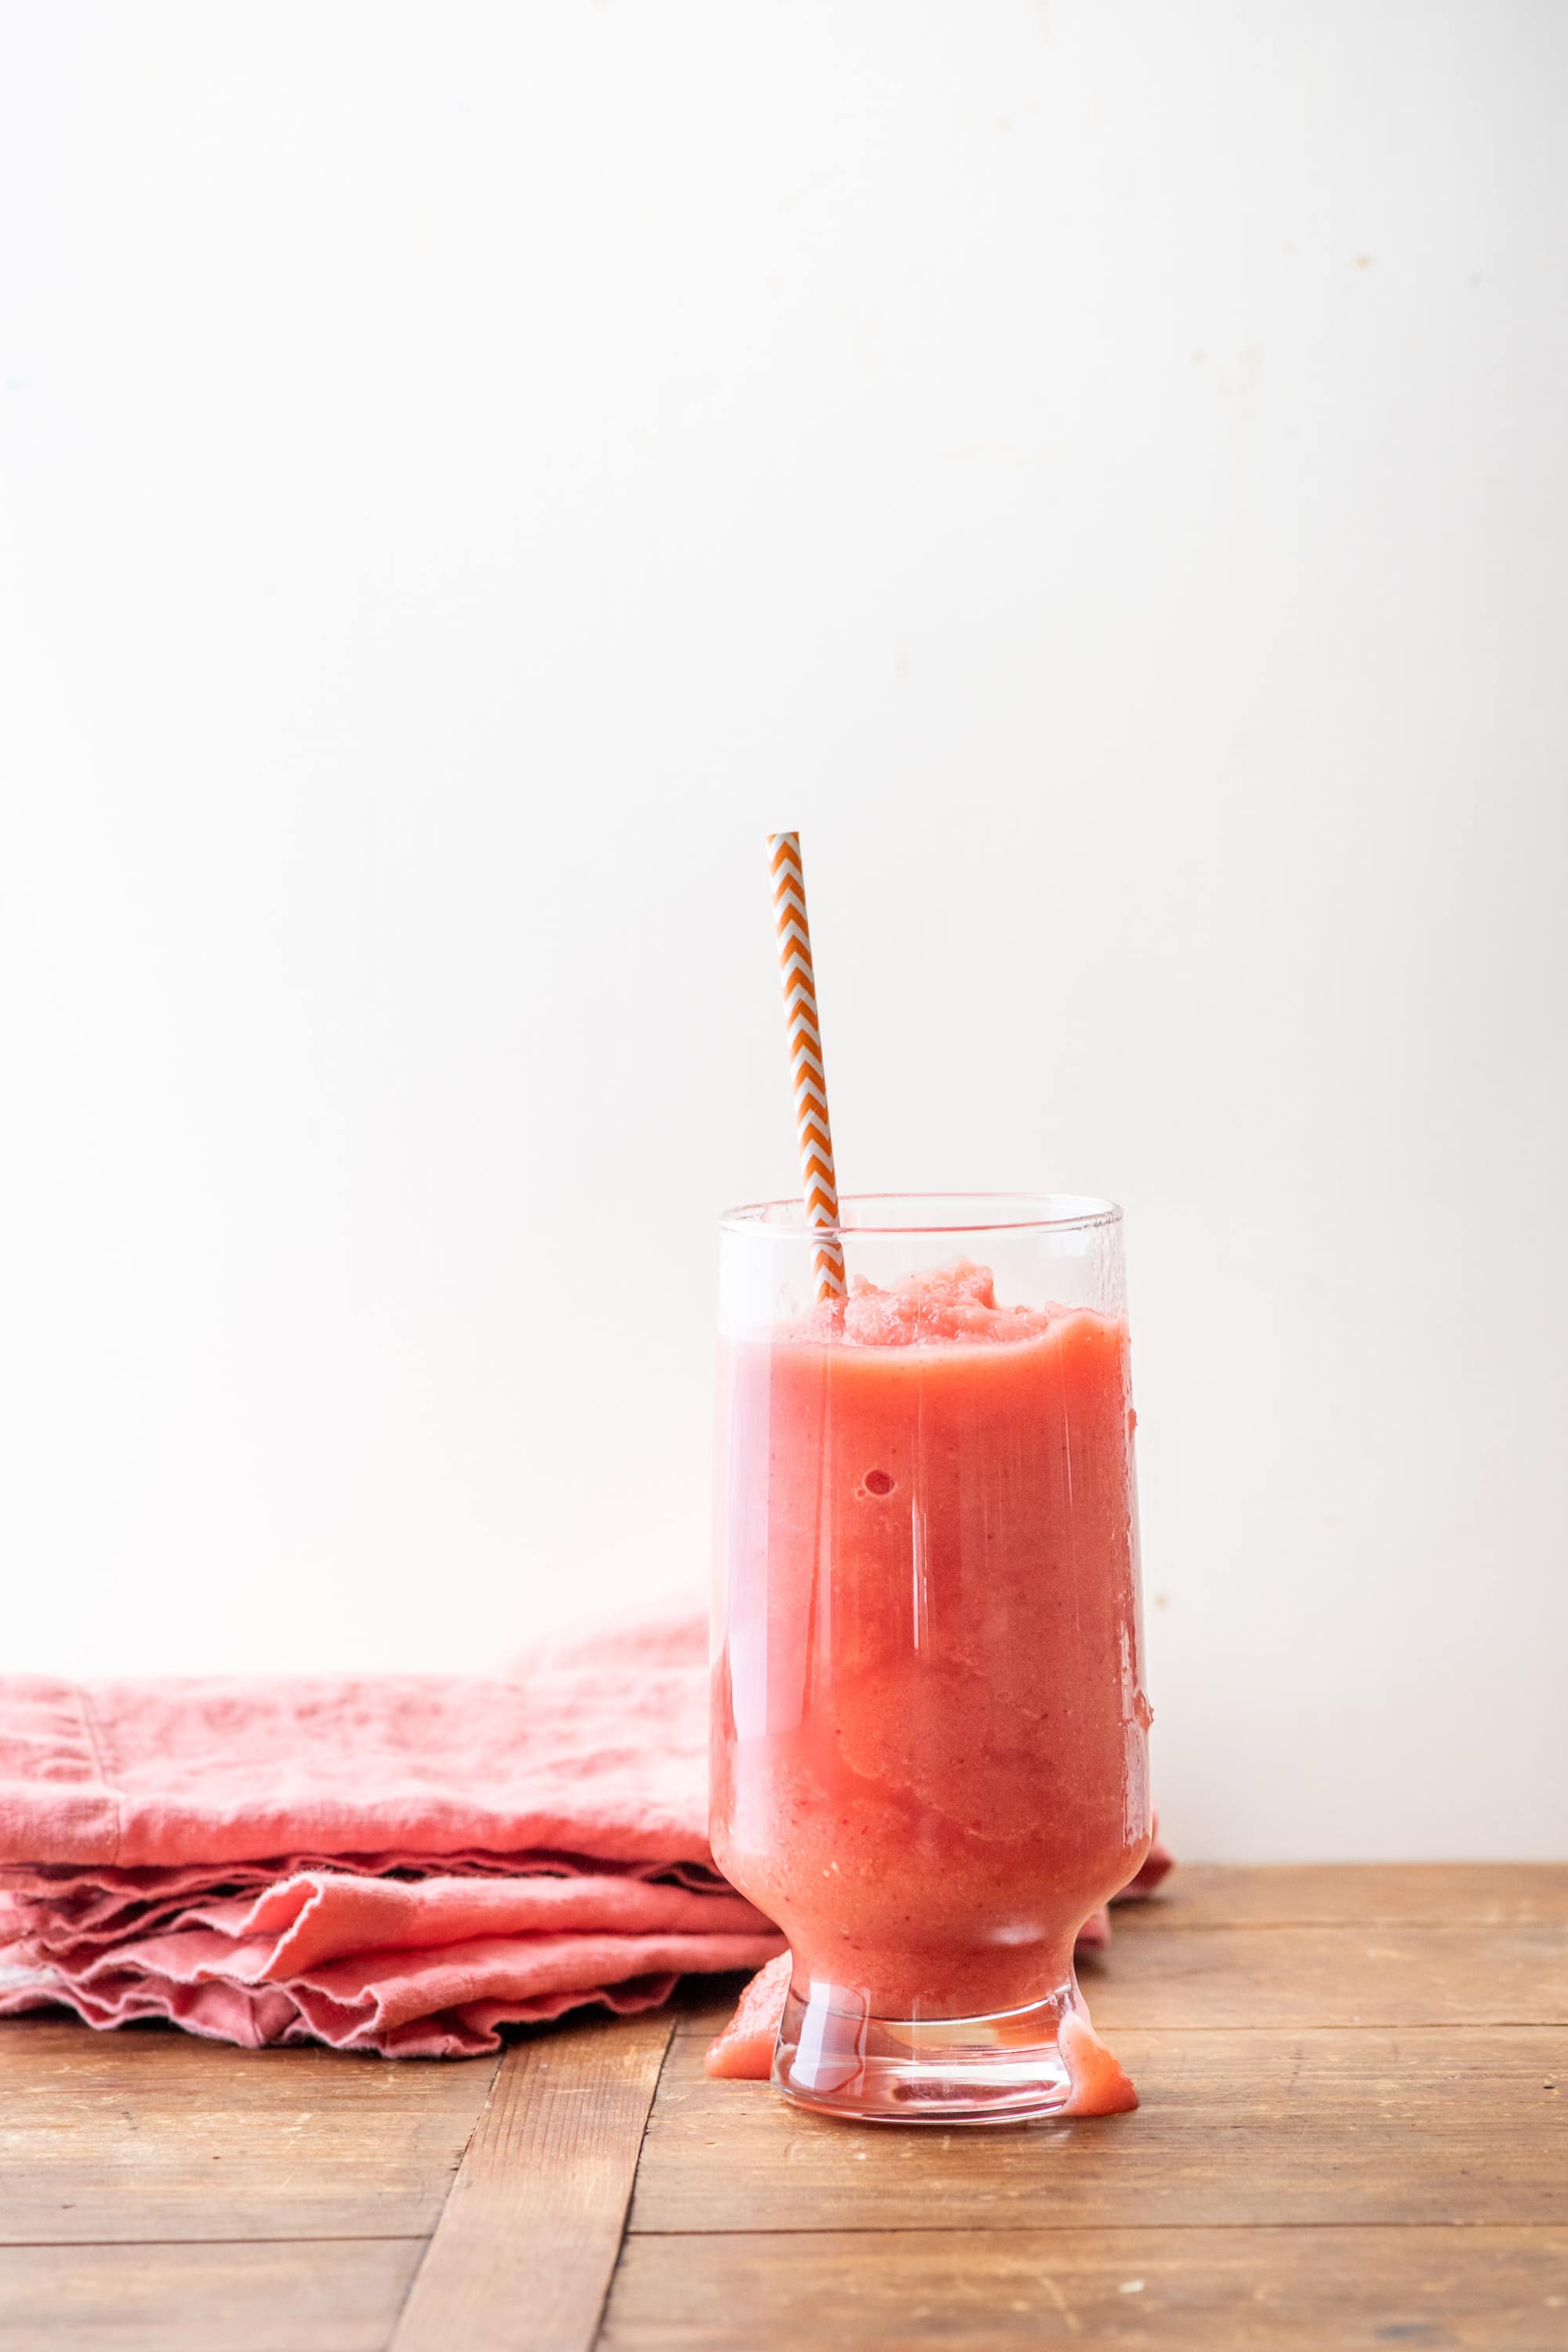 Glass of Watermelon Strawberry Smoothie with a colorful straw.